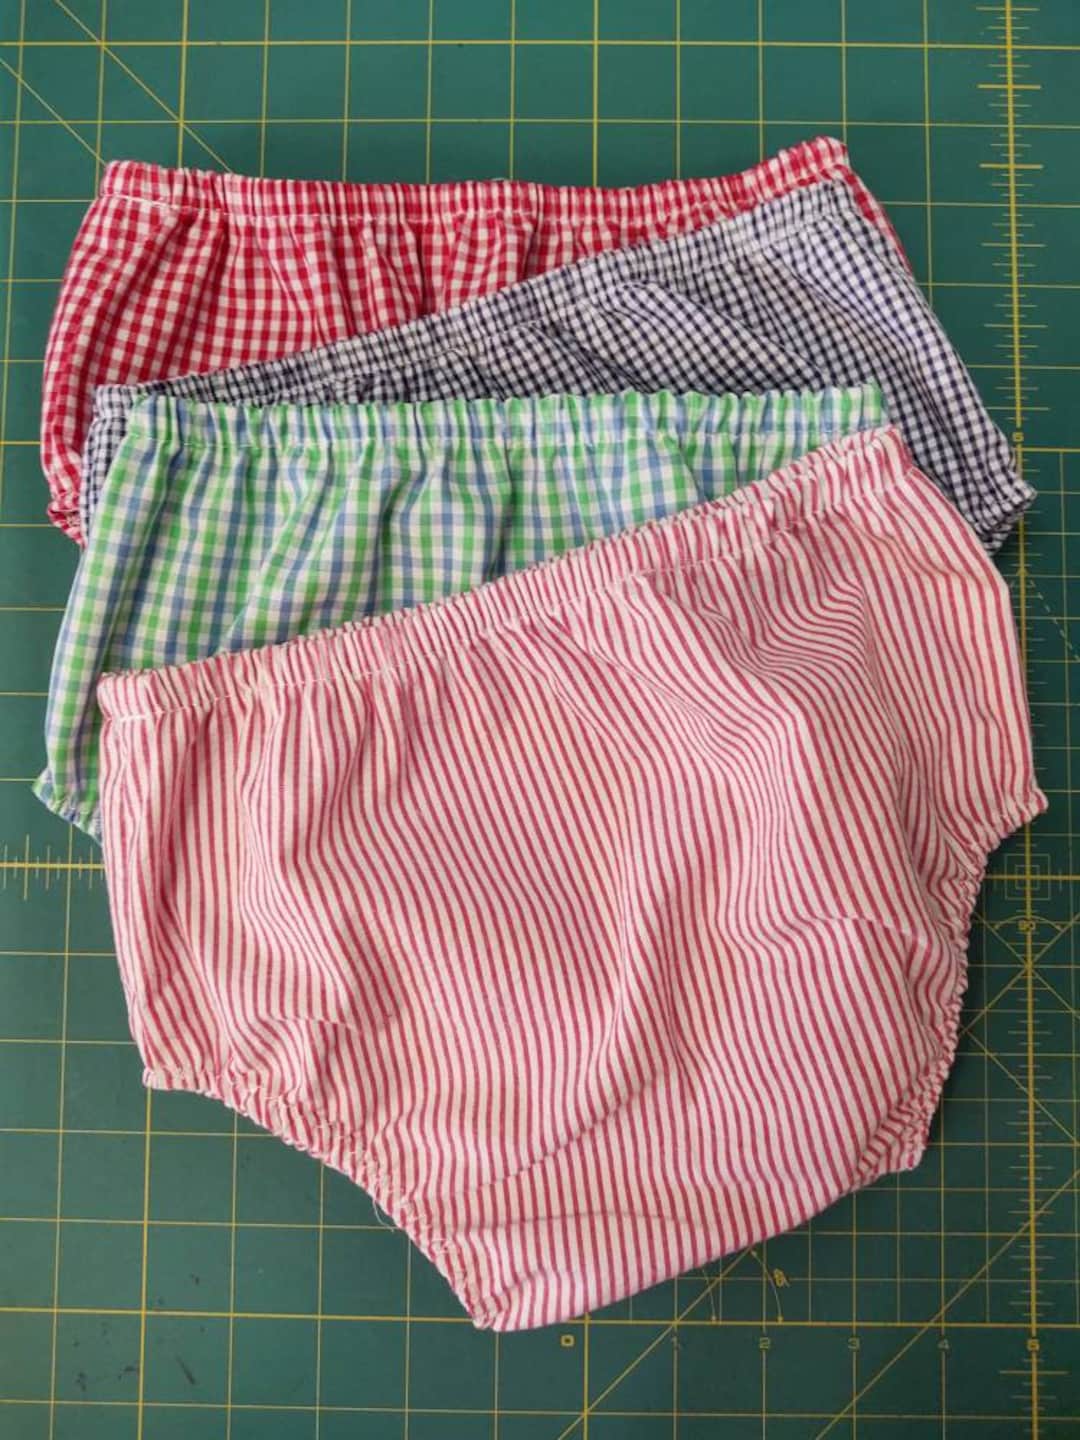 BOYS Diaper Covers GIRLS Diaper Covers Size O/3 3/6 6/9 9/12 - Etsy